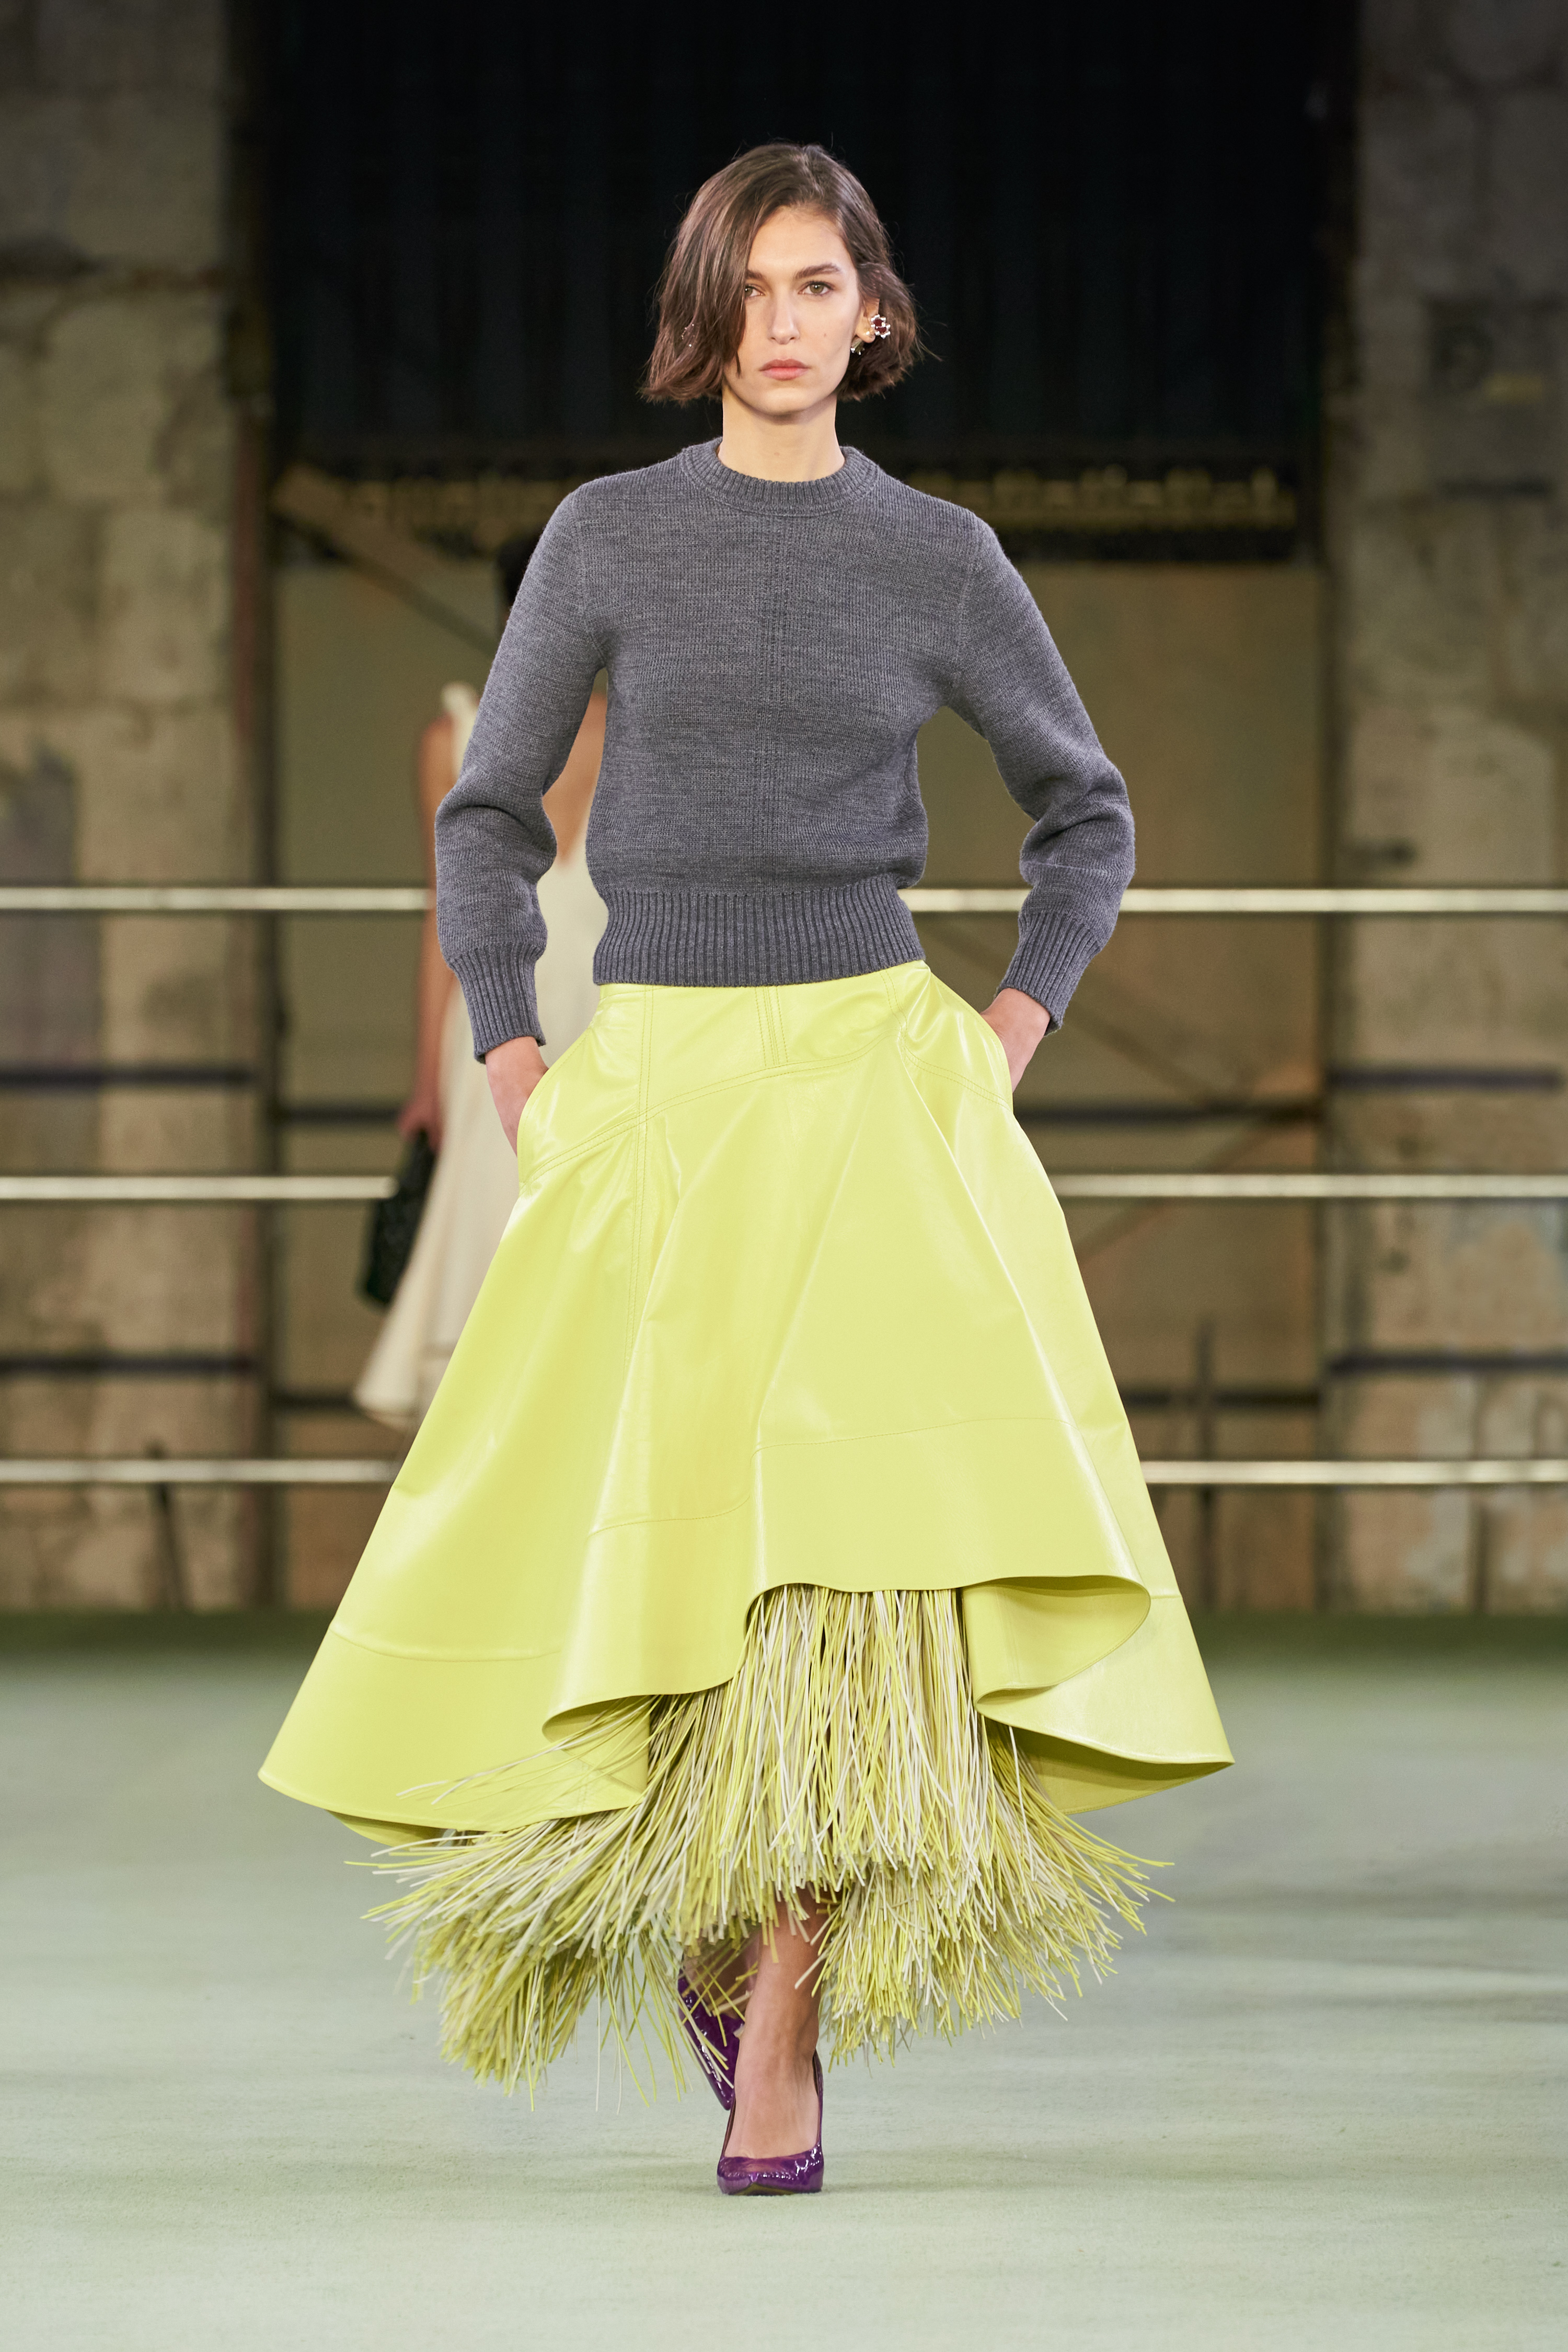 verwennen Verstrooien Verhandeling H&M Just Dropped a $50 Version of This Runway Skirt Trend | Who What Wear